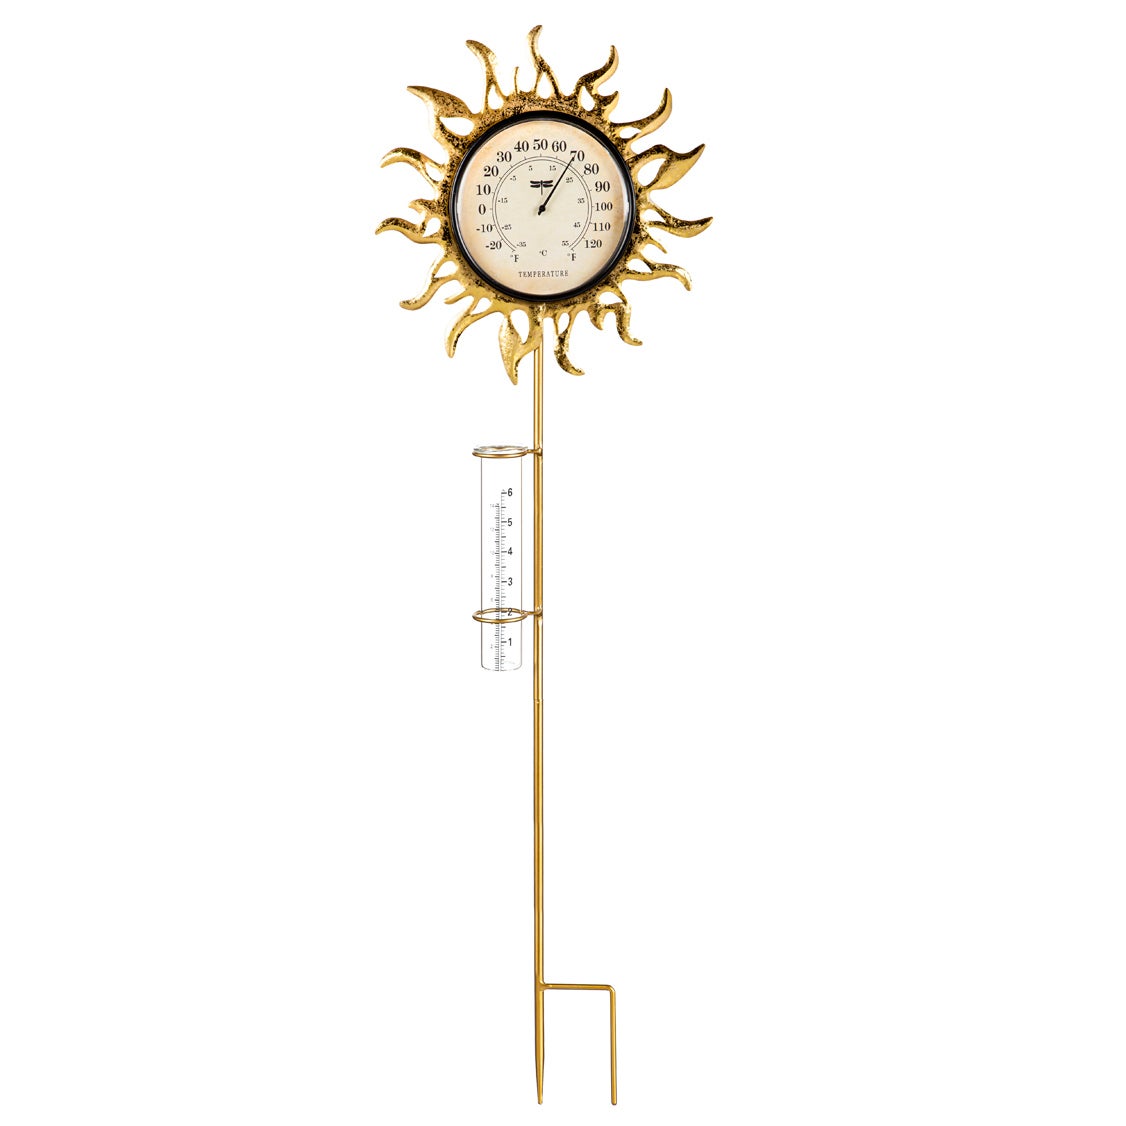 Sunny Days 36"H Thermometer With Rain Gauge Stake